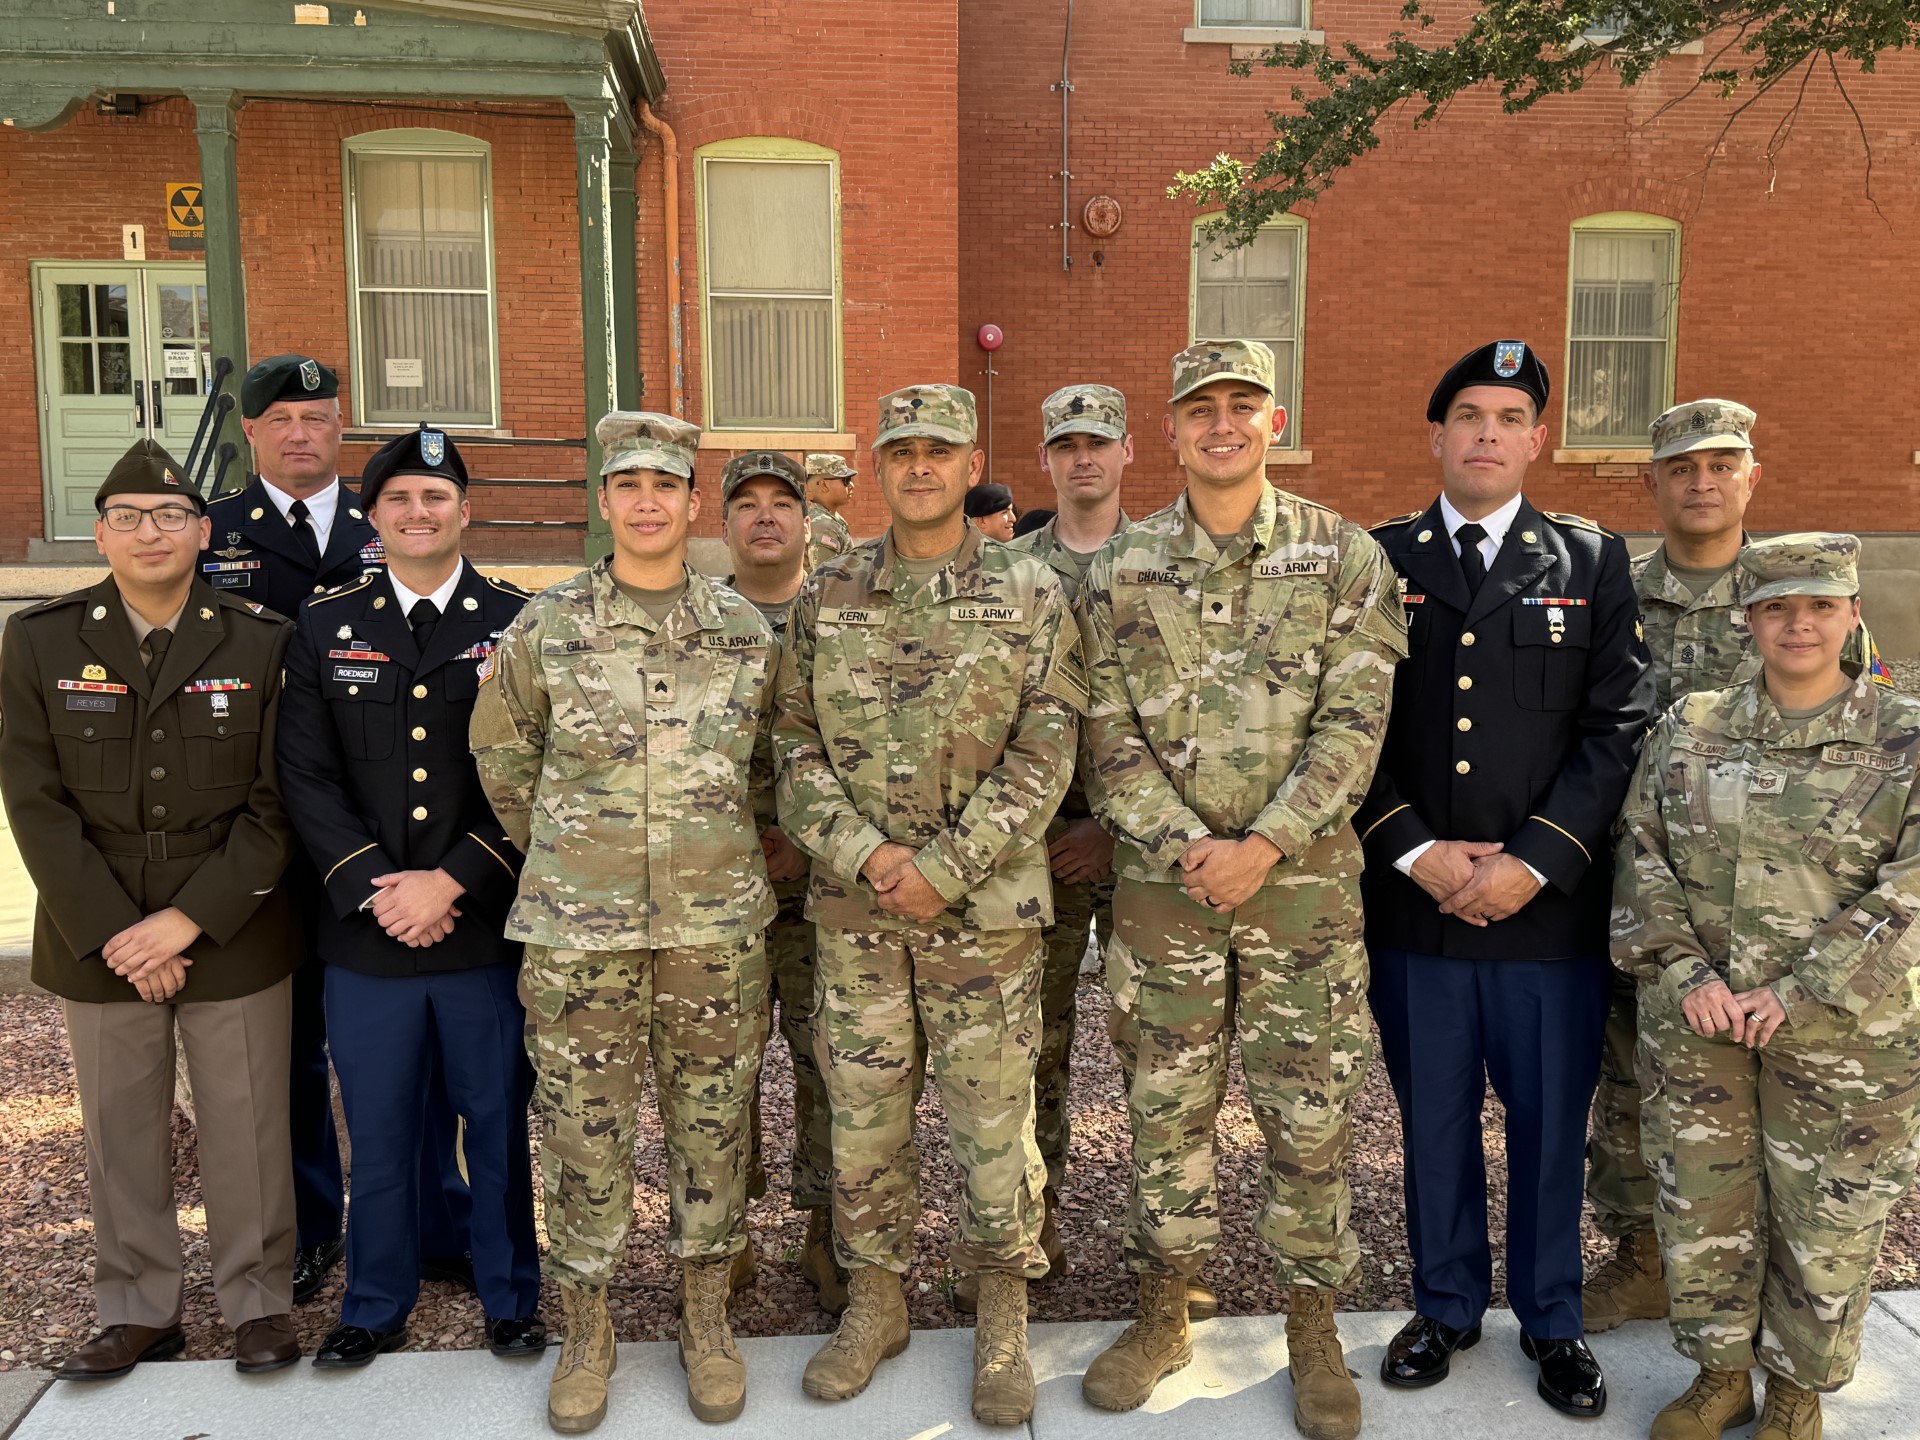 Soldiers Pose for group photo